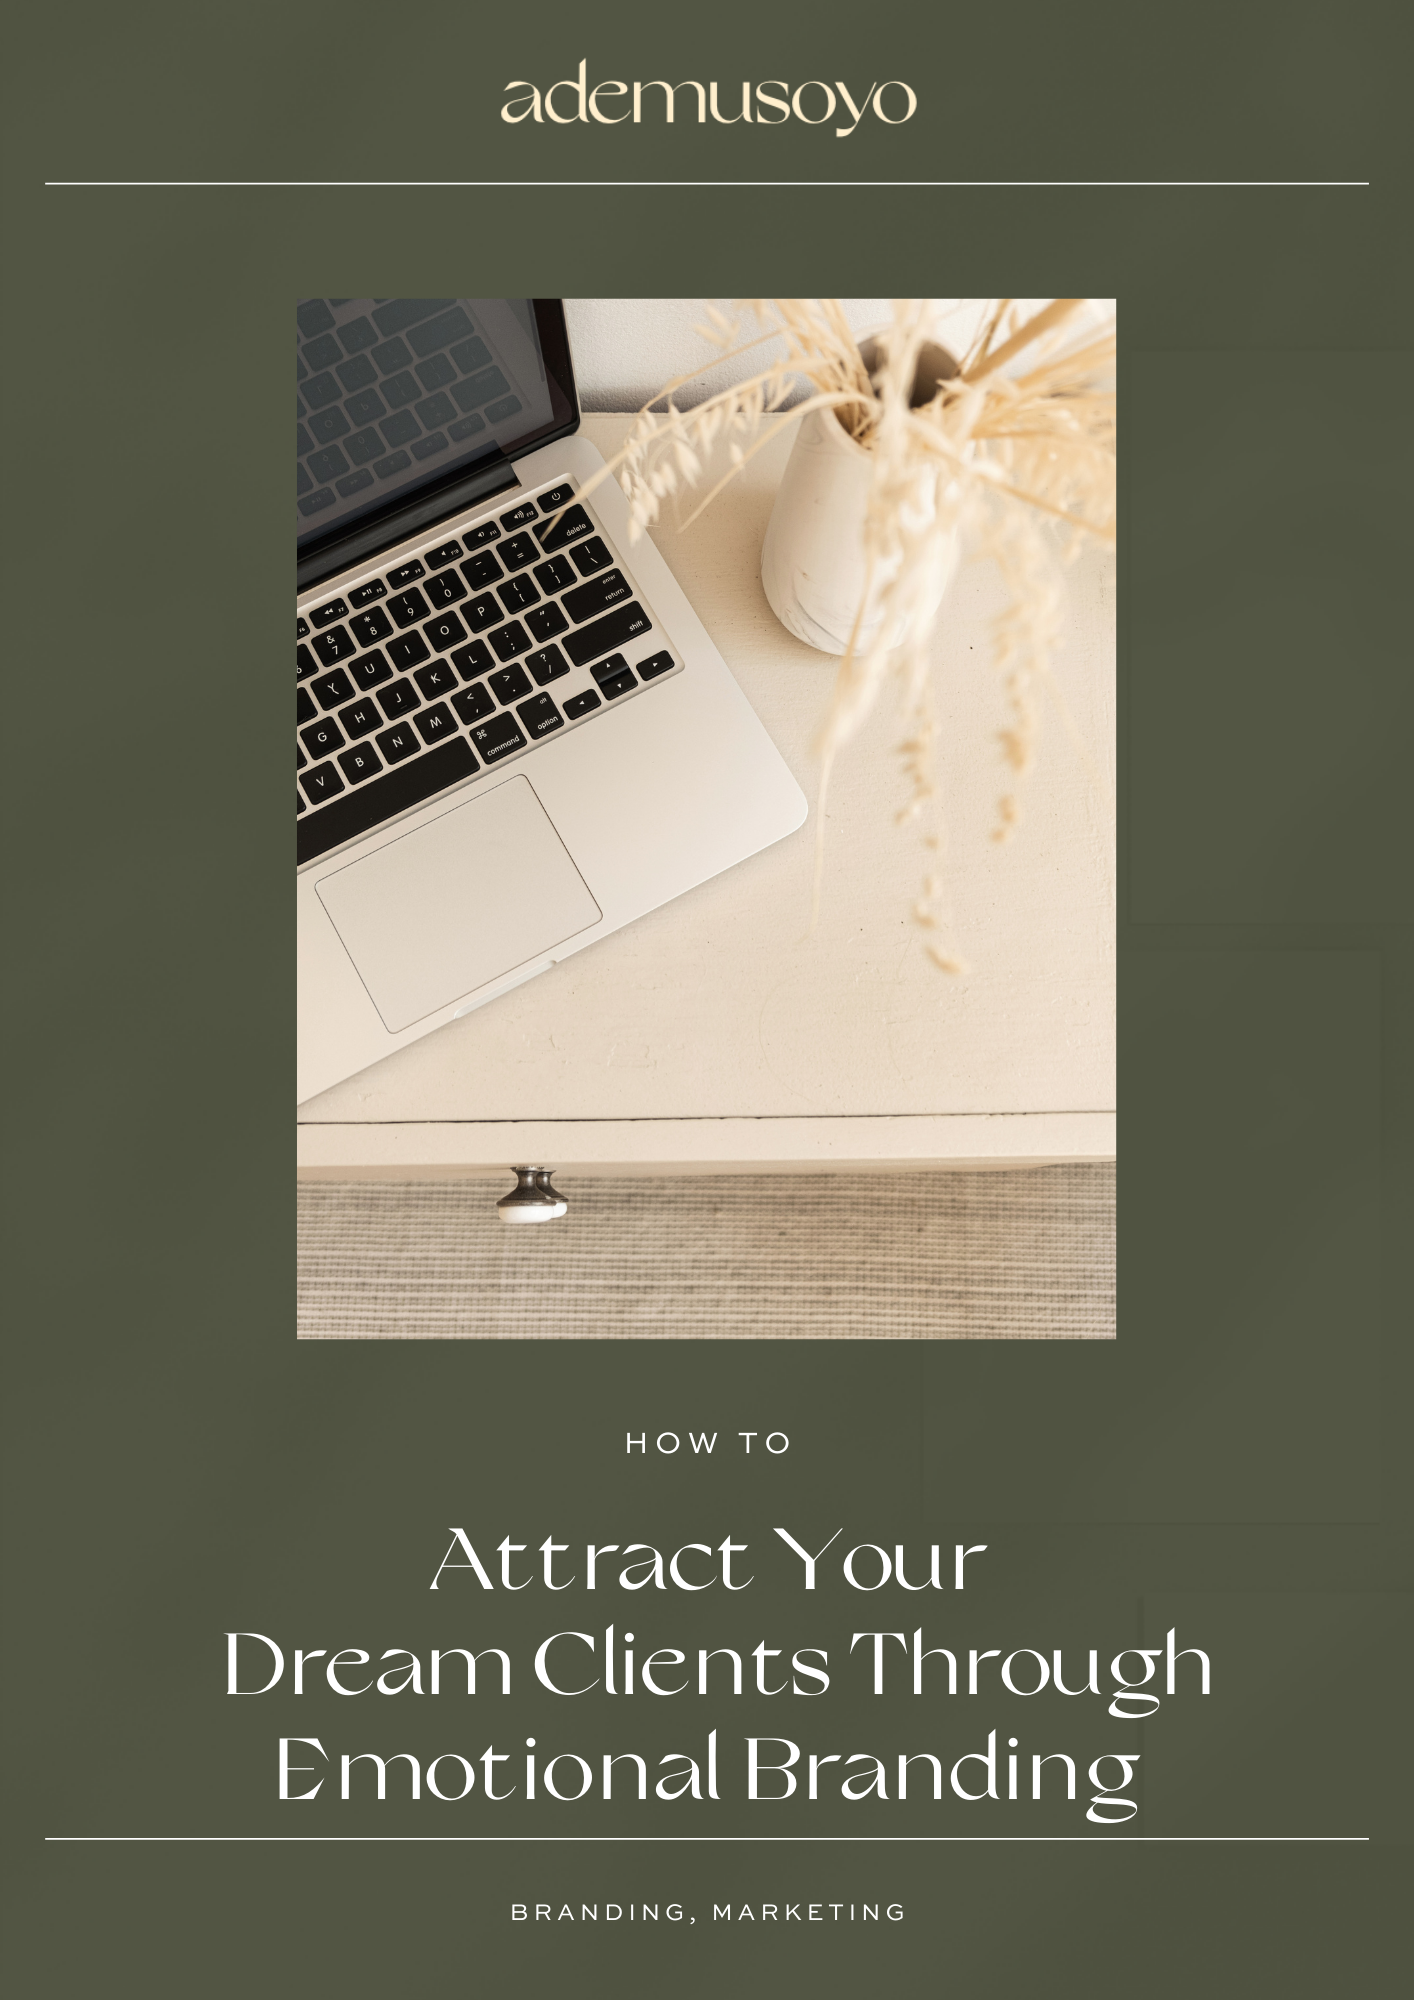 a laptop on top of an office desk with text that says "How To Attract Your Dream Clients Through Emotional Branding". Emotional branding strategy and tips for small business owners